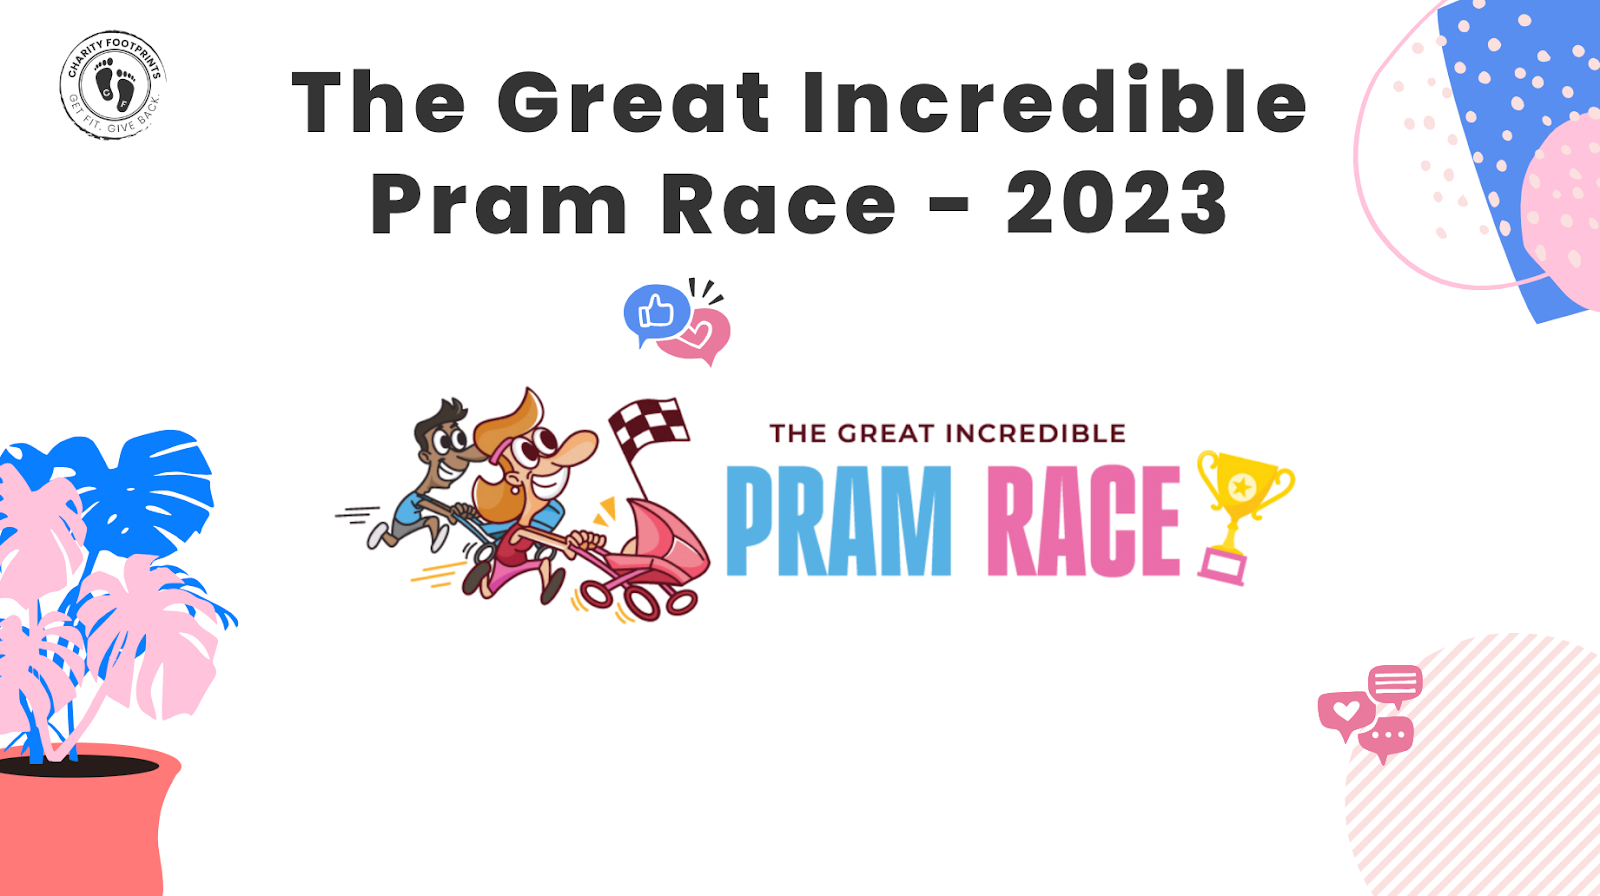 Join Charity Footprints and Mums4Mums in the Great Incredible Pram Race—where every step leaves an imprint of love and support.